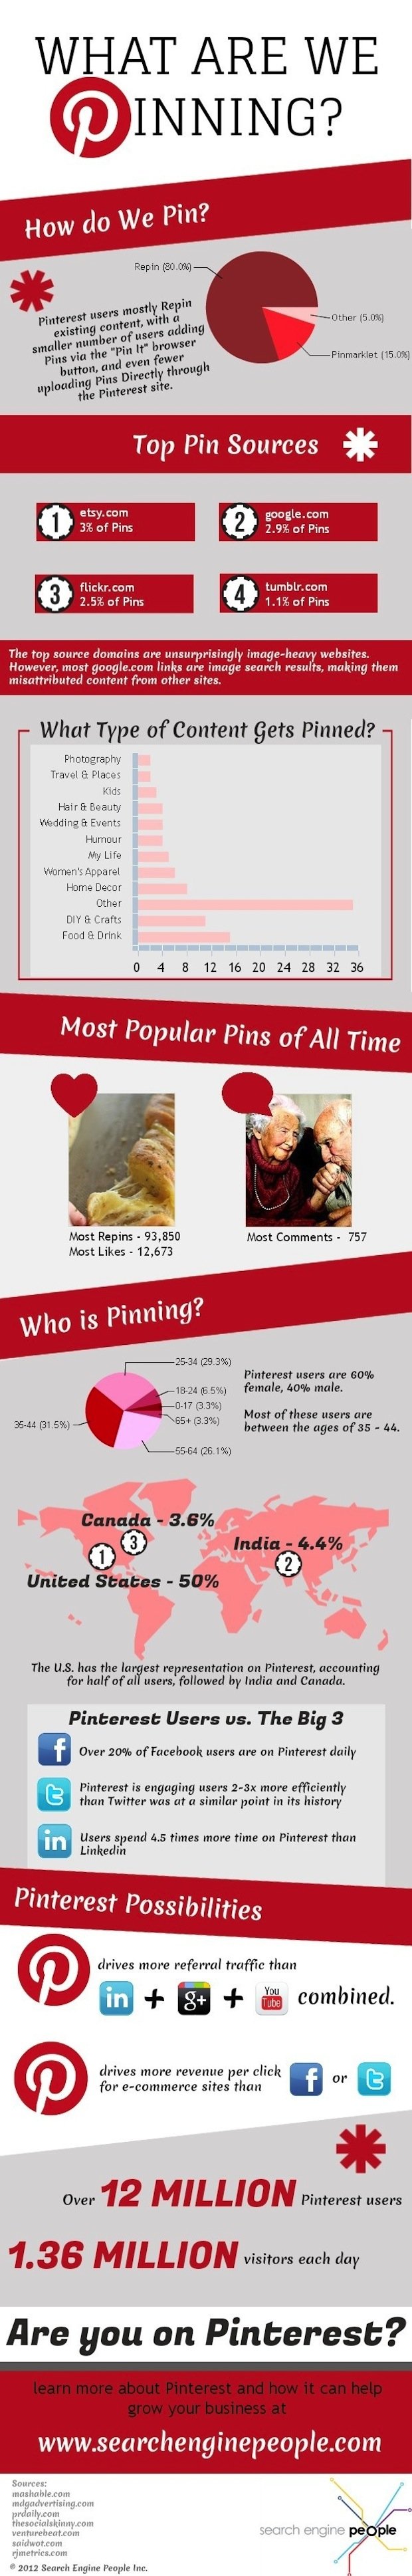 pinterest facts infographic pinning